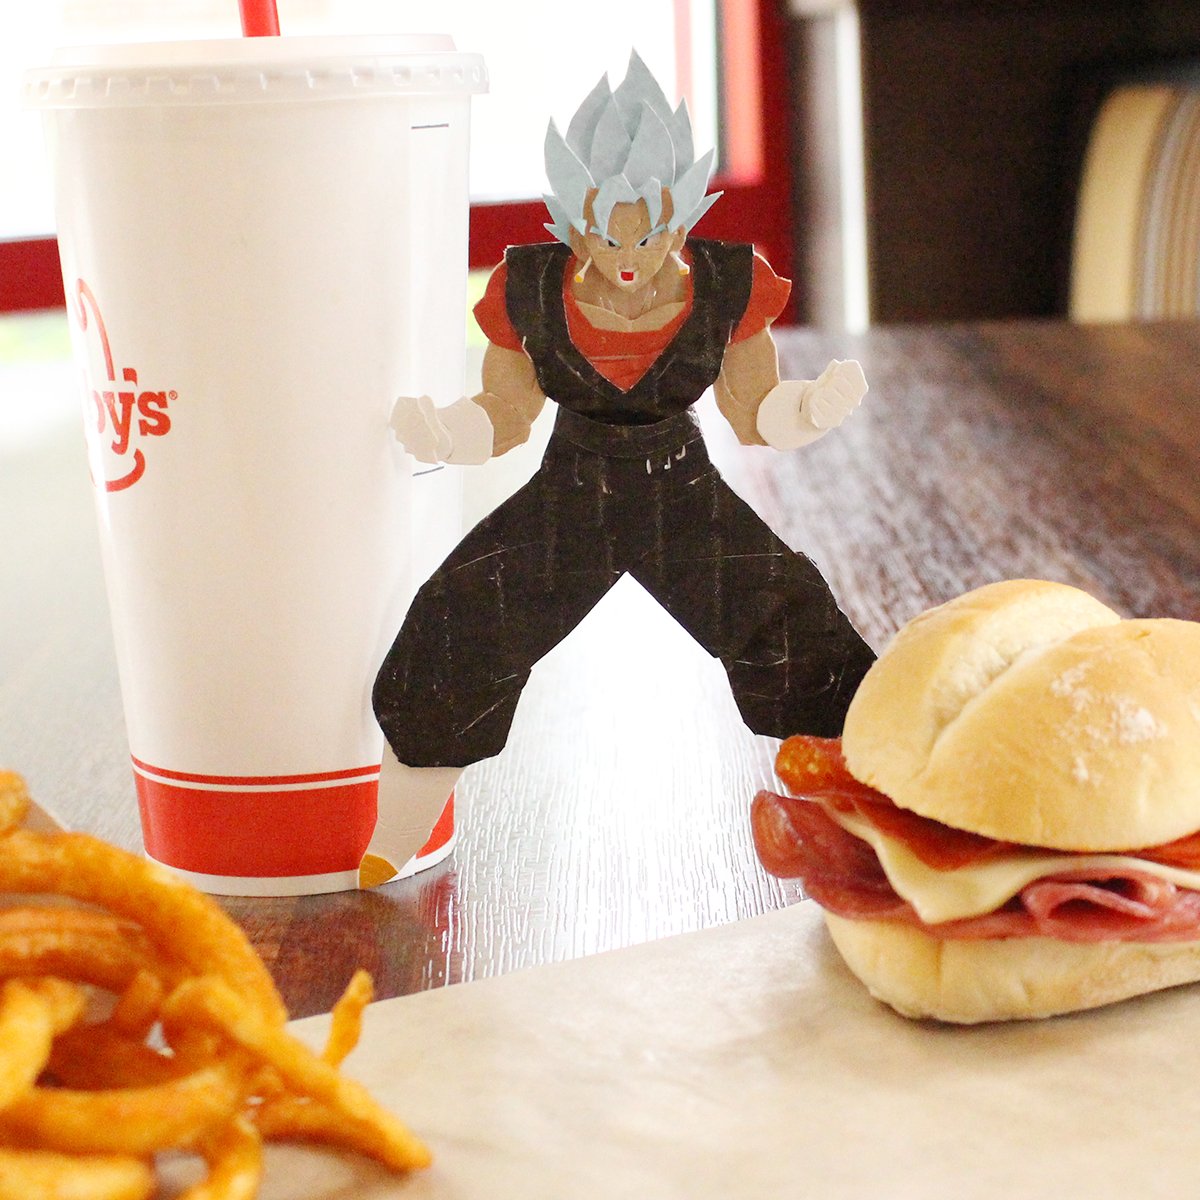 Arby's on Twitter.